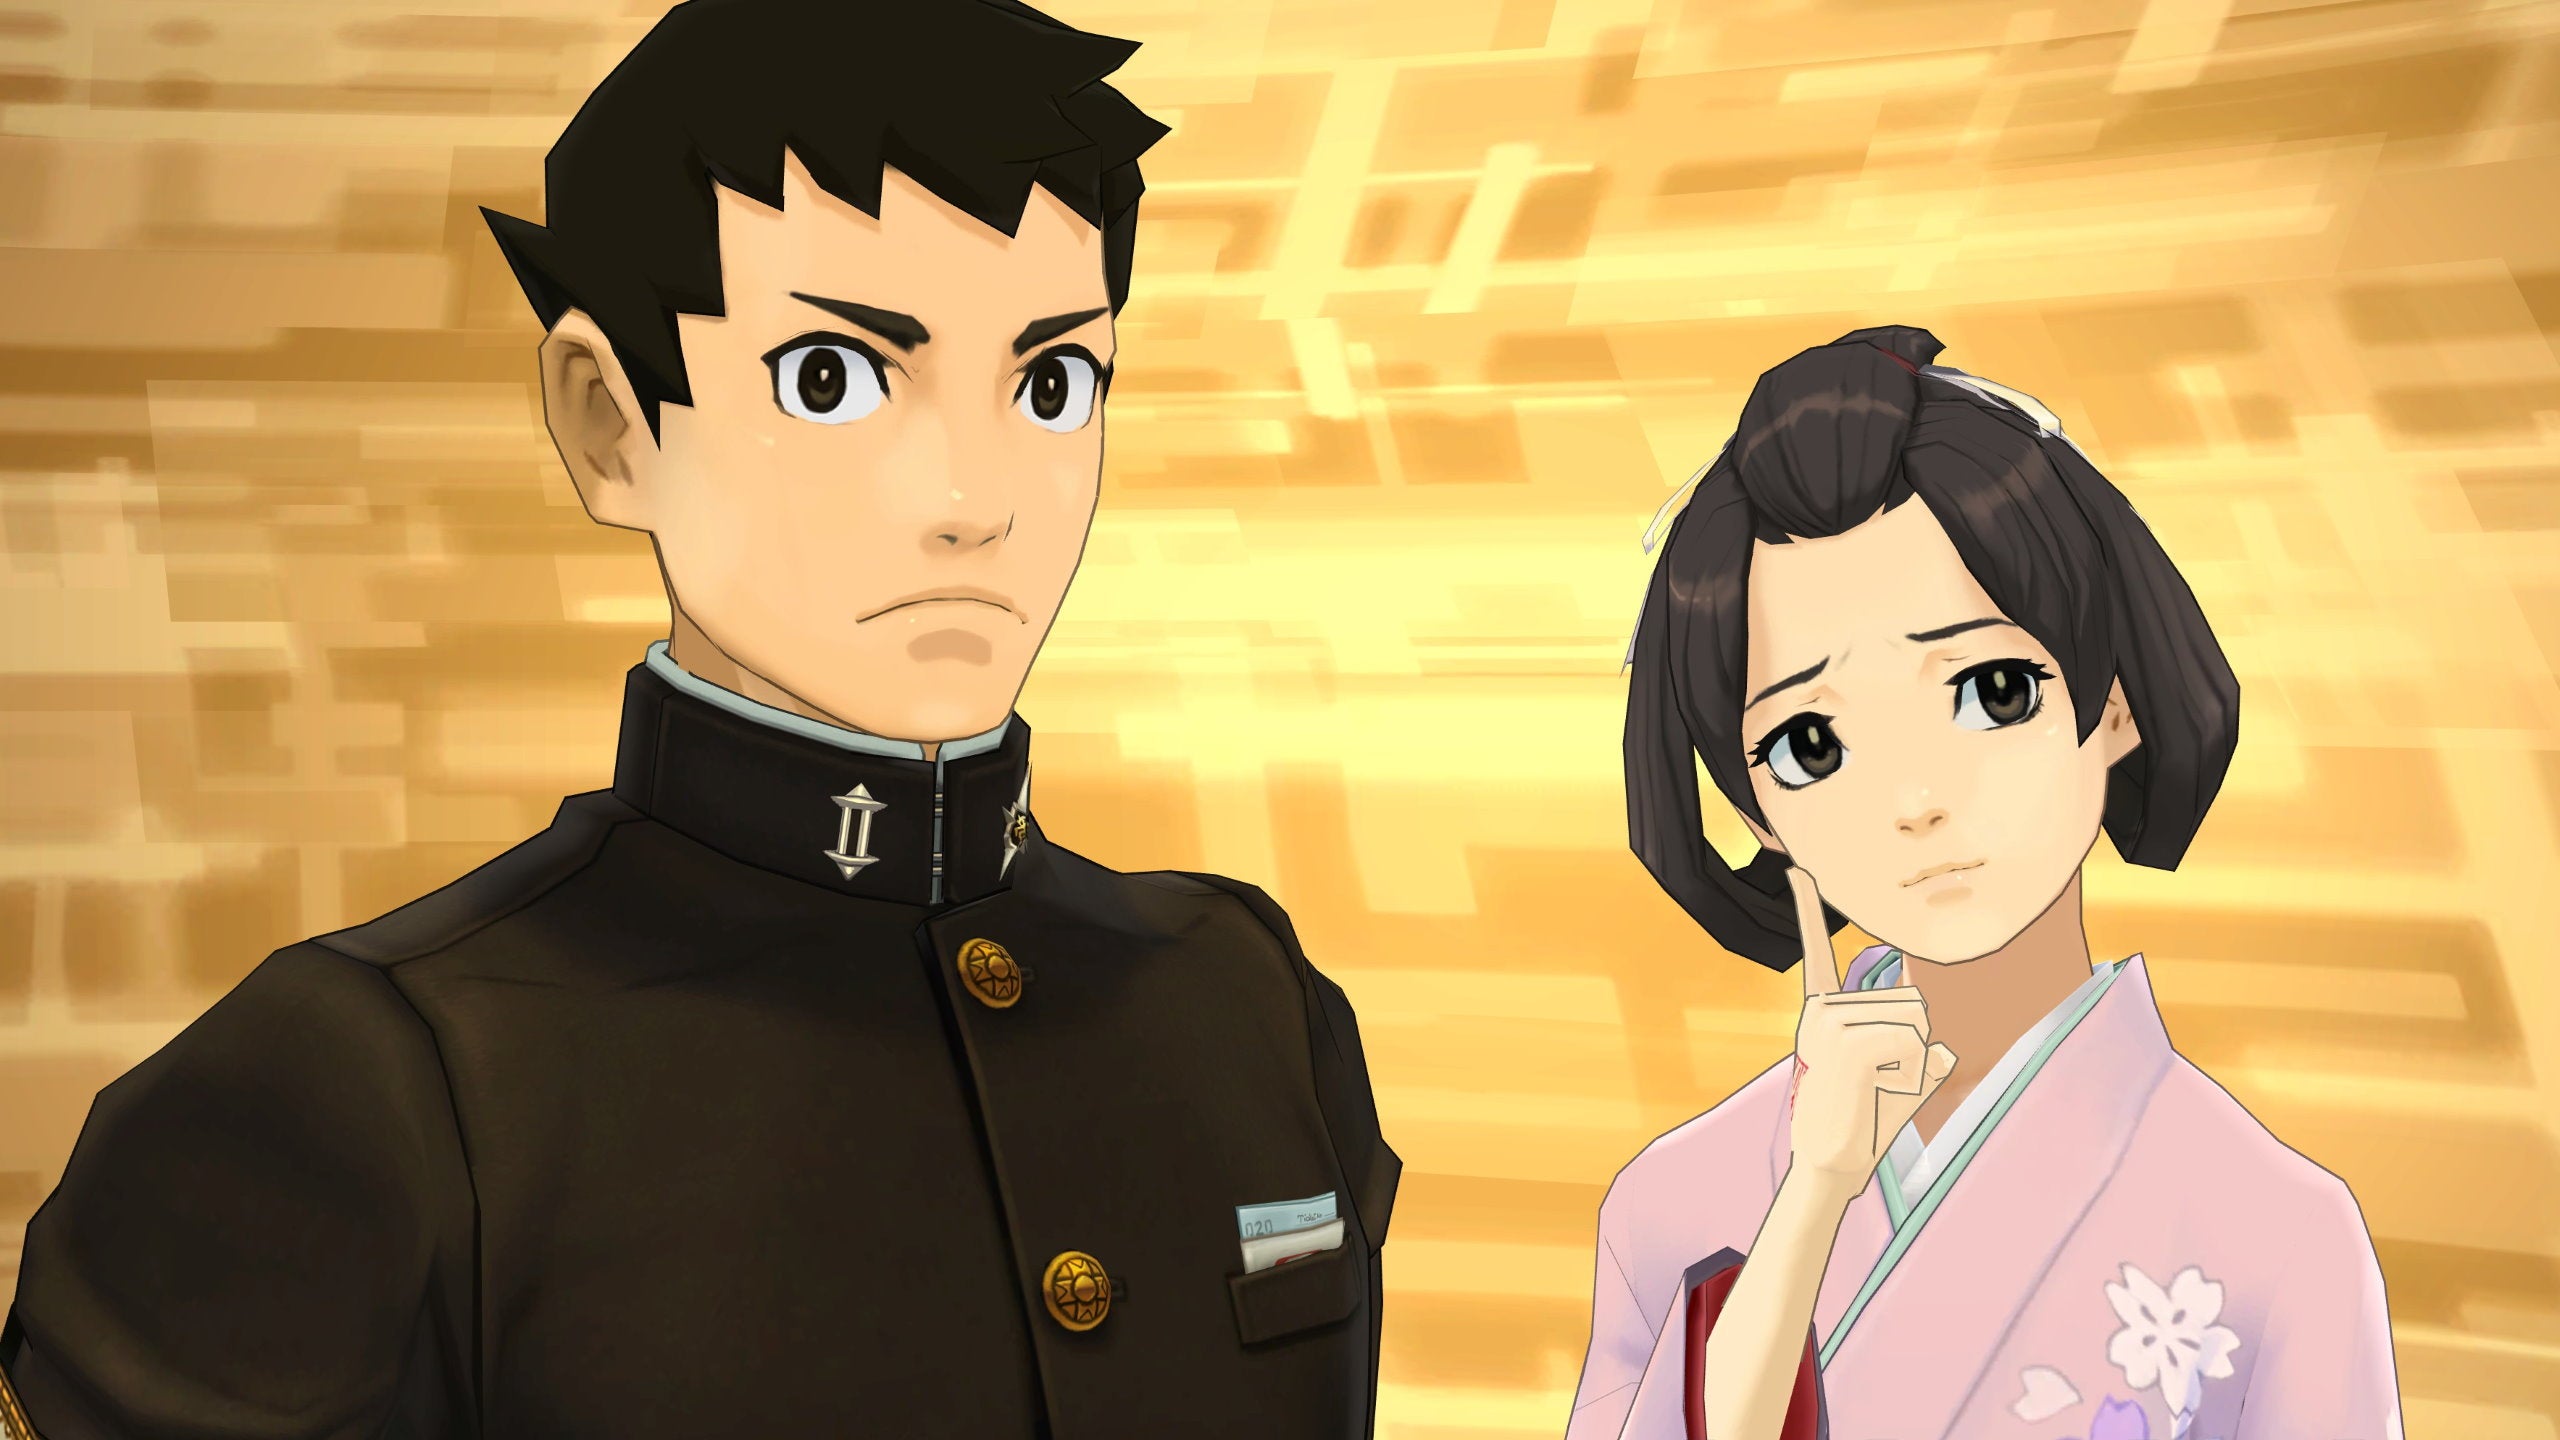 Ryunosuke and Susato against a yellow background in The Great Ace Attorney Chronicles